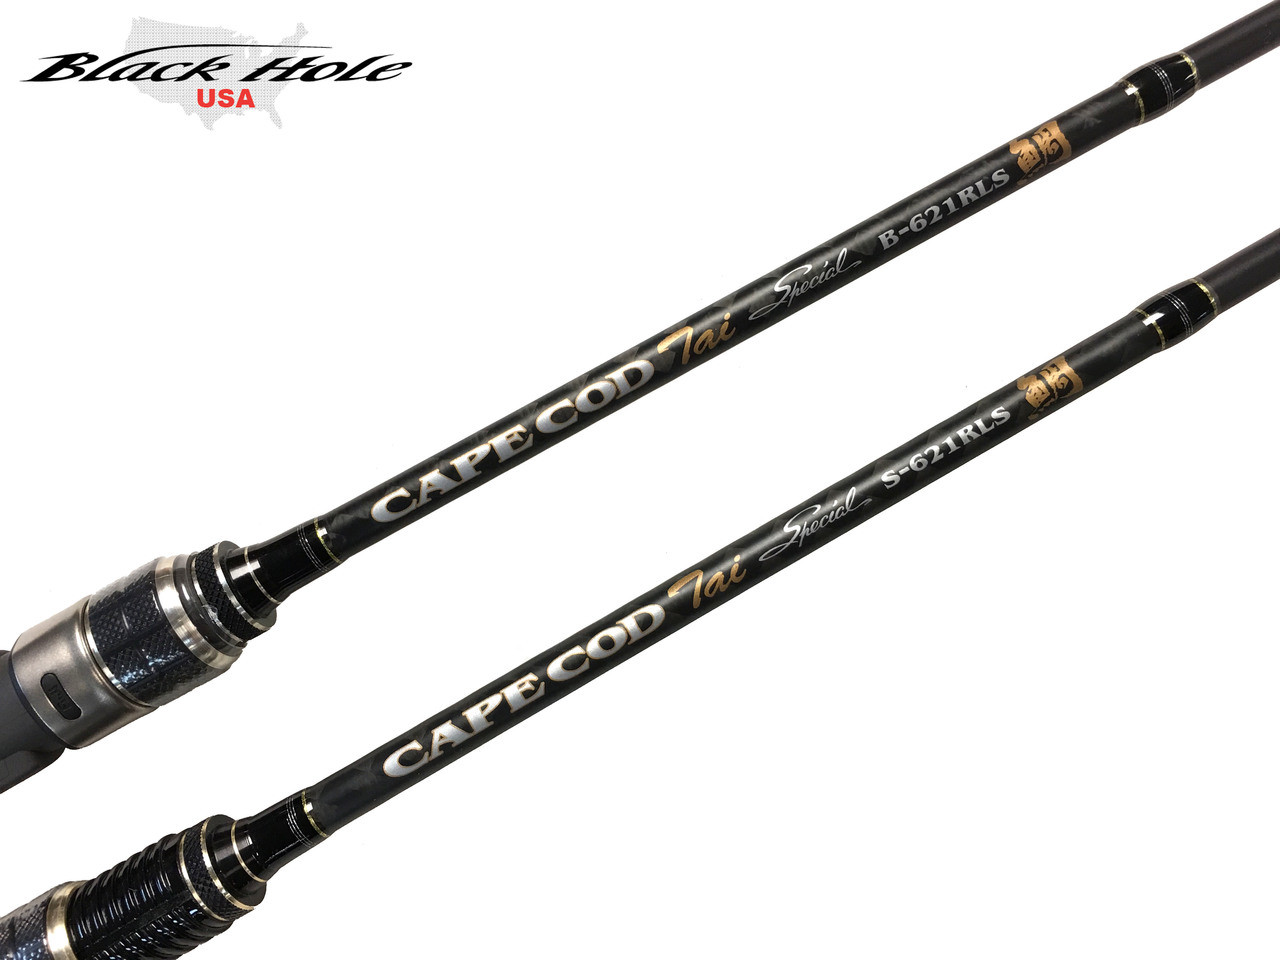 Black Hole Cape Cod TAI (Snapper) Special Rod - Ultra Light Conventional & Spinning